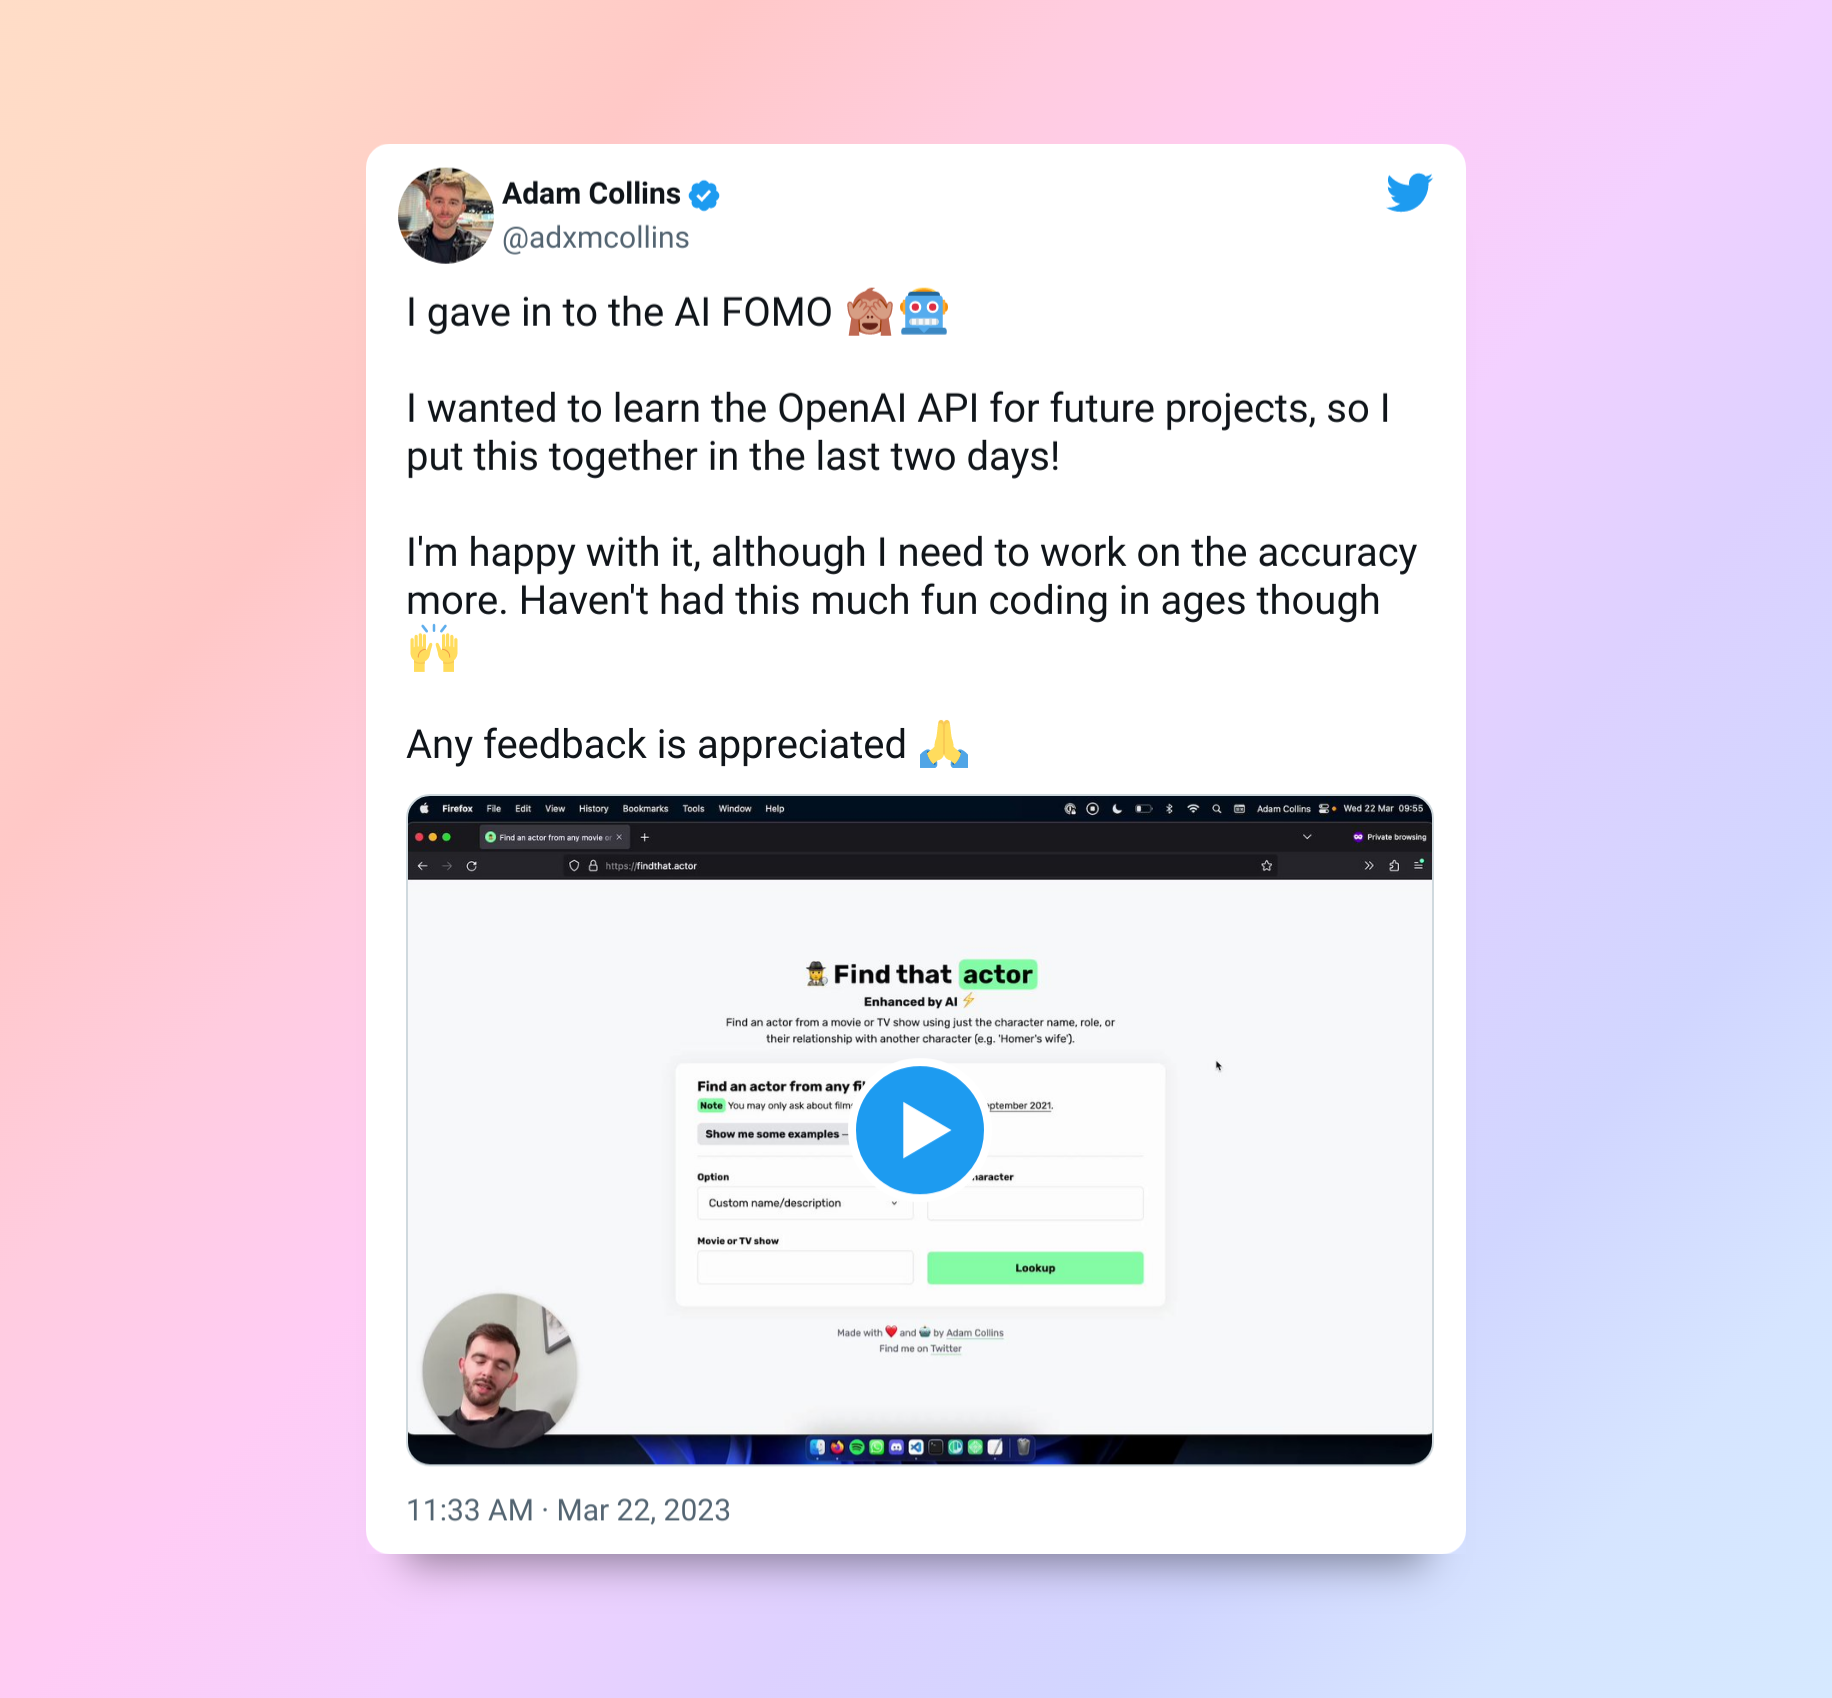 Tweet: I gave in to the AI FOMO